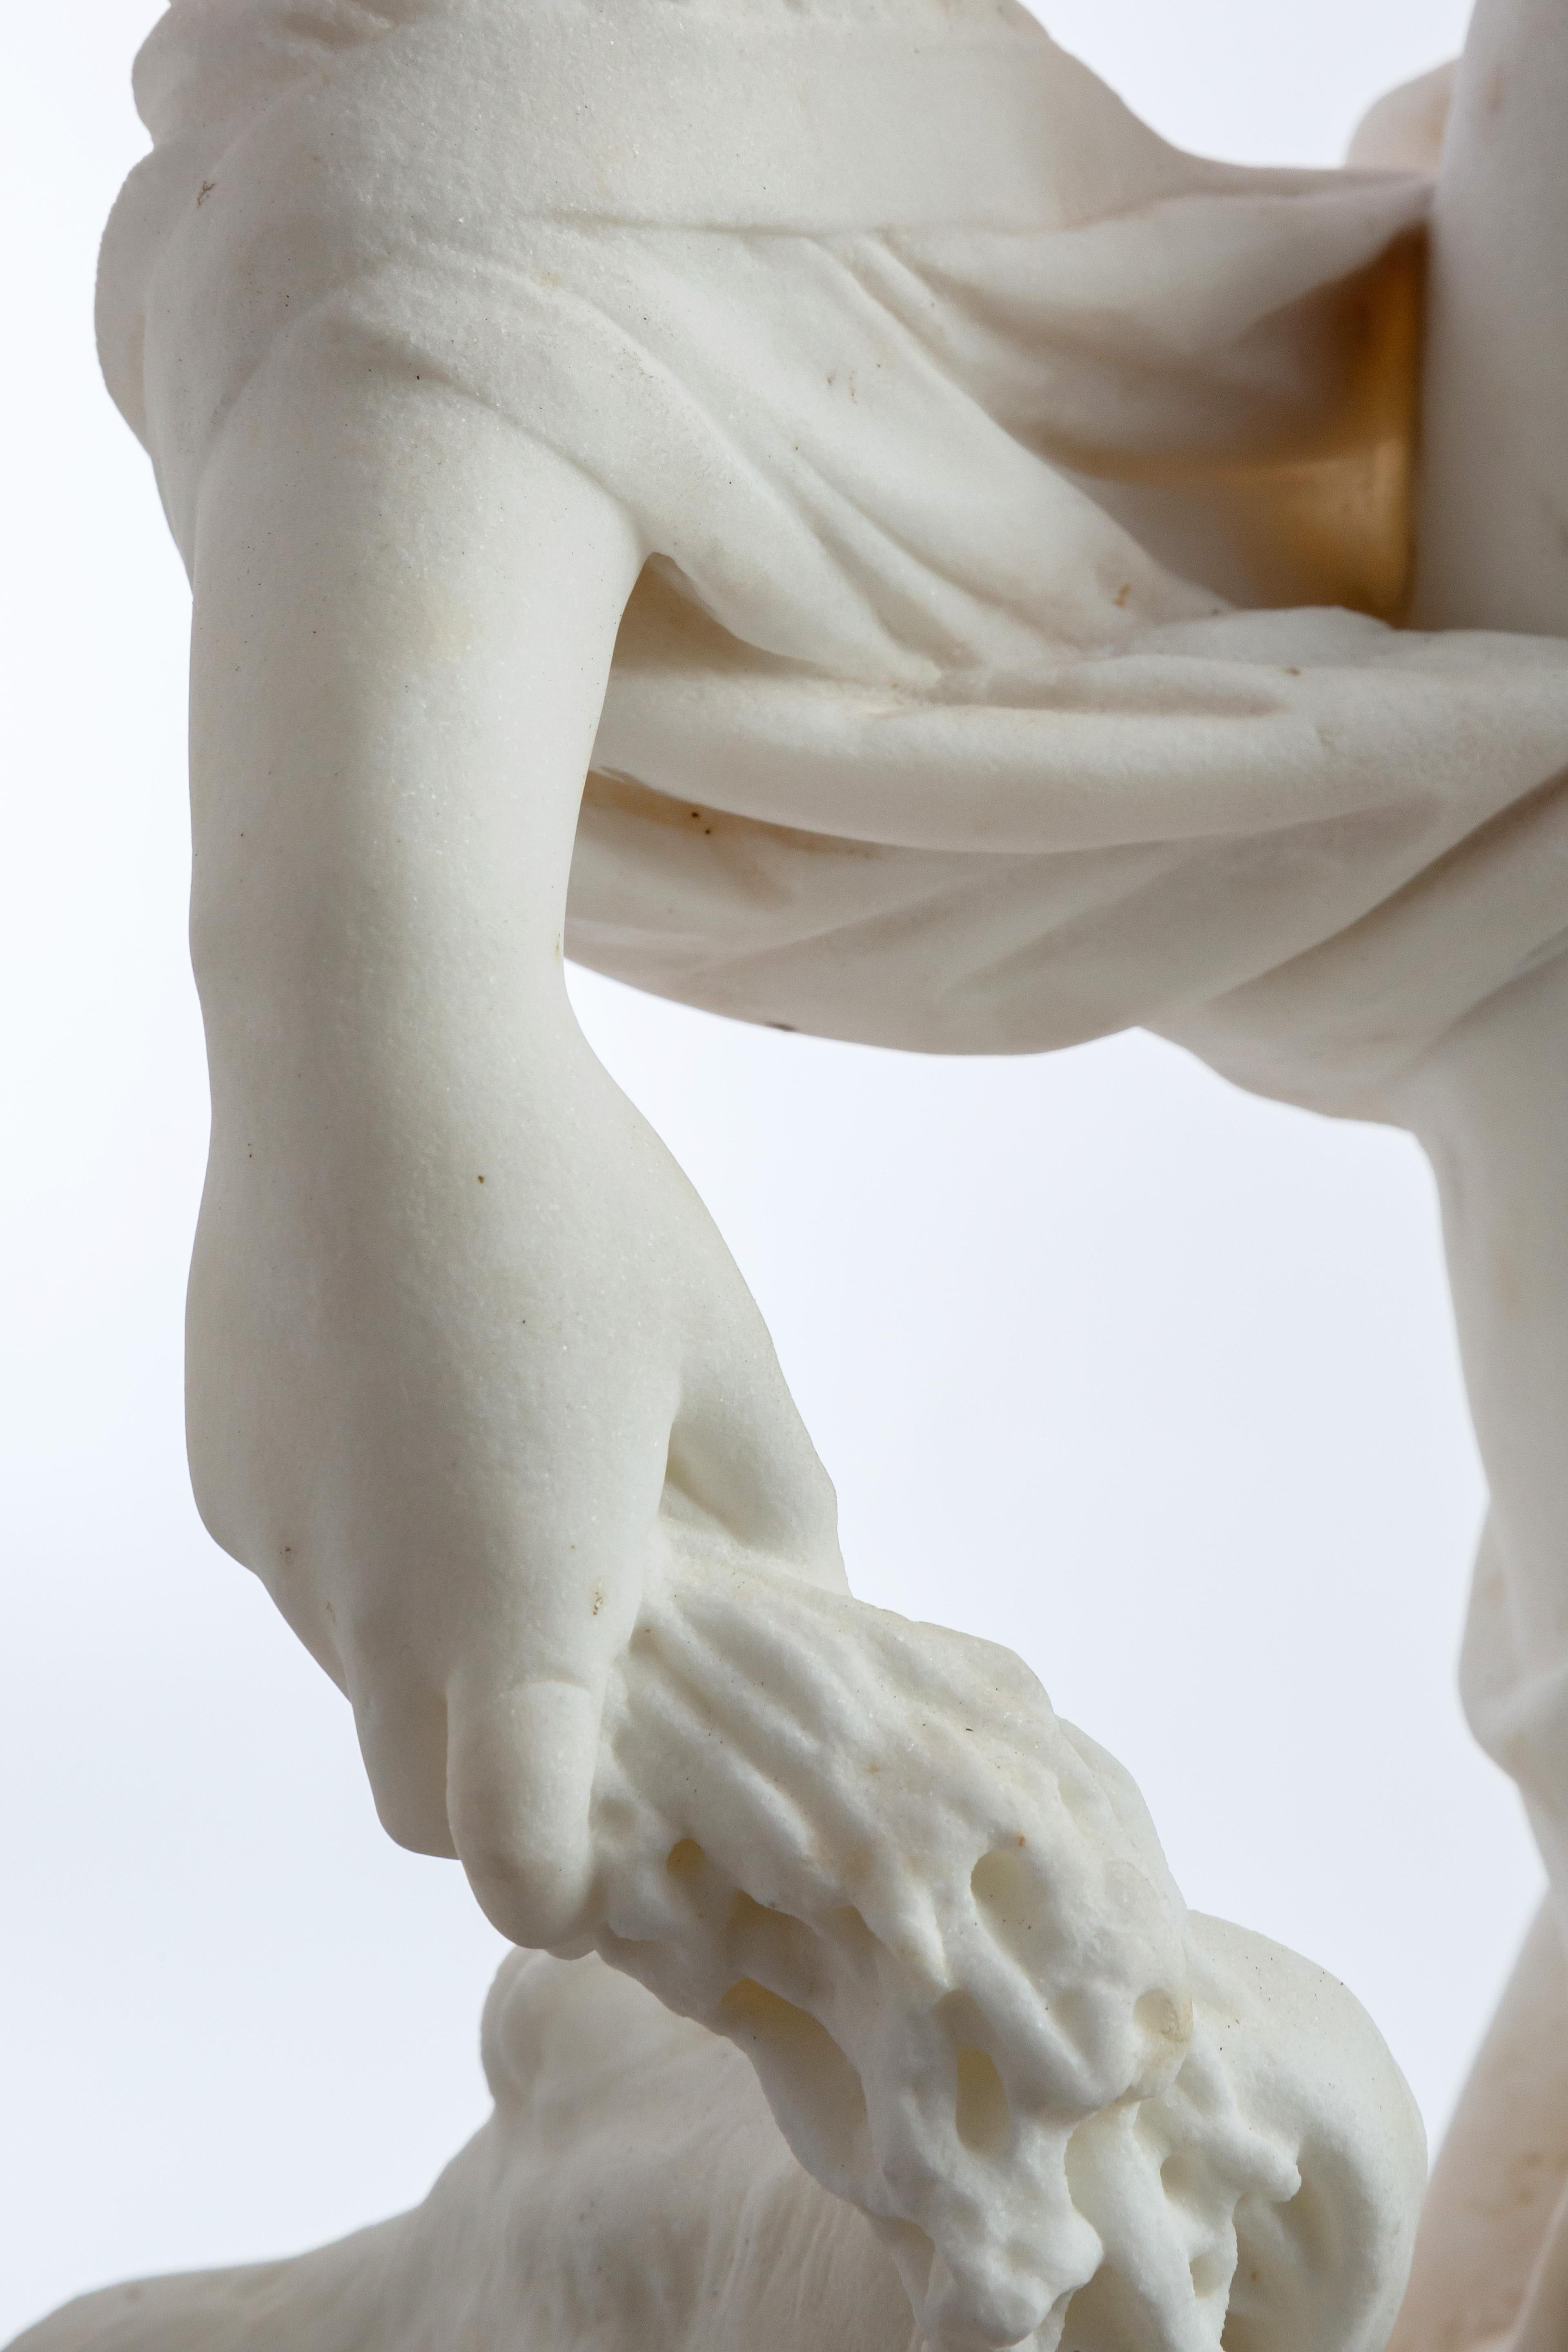 Le Retour des Champs ‘Return from the Harvest’ Carrara Marble, Signed and Dated 4